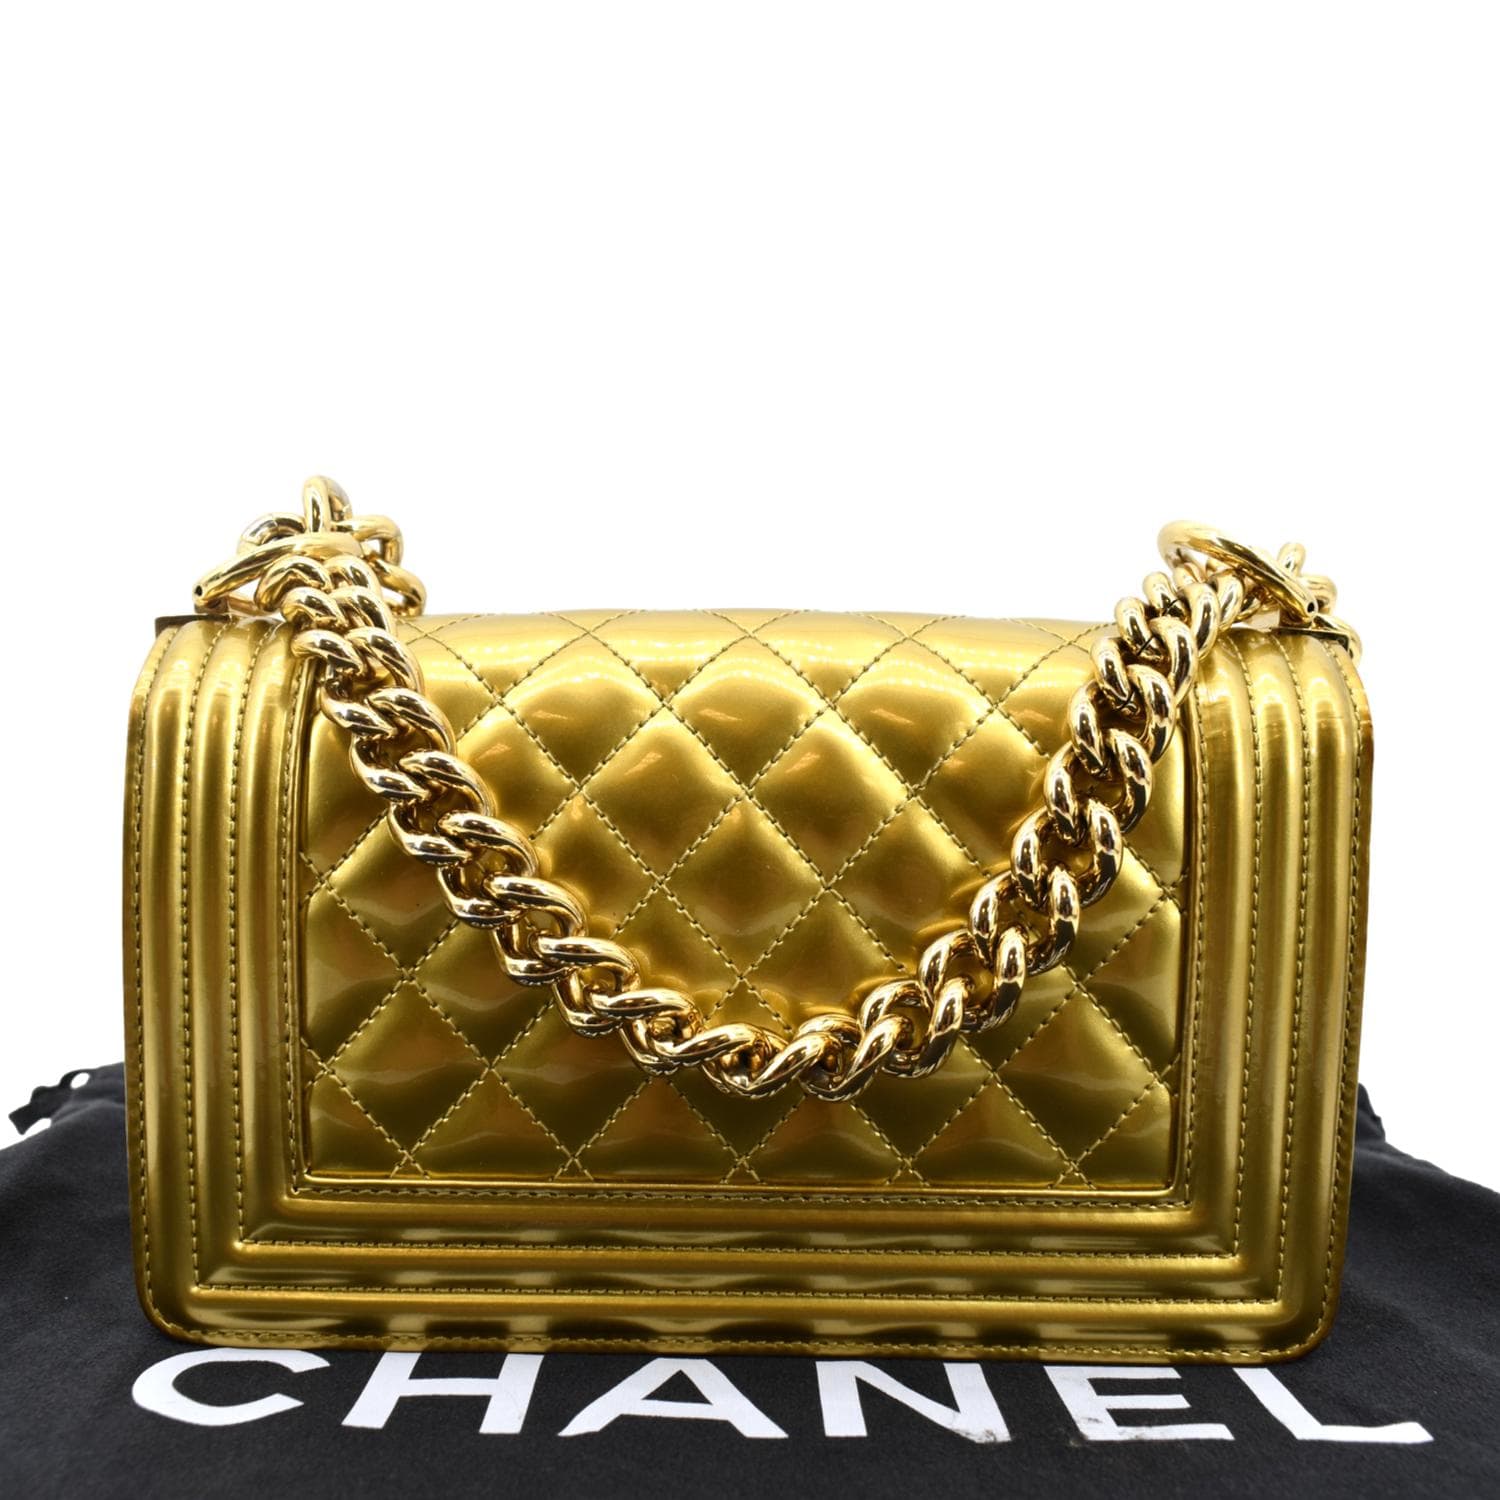 Chanel Bleu Metiérs d'Art Mosaic Embroidered Small Boy Bag of Lambskin  Leather with Antiqued Gold Tone Hardware, Handbags & Accessories Online, Ecommerce Retail